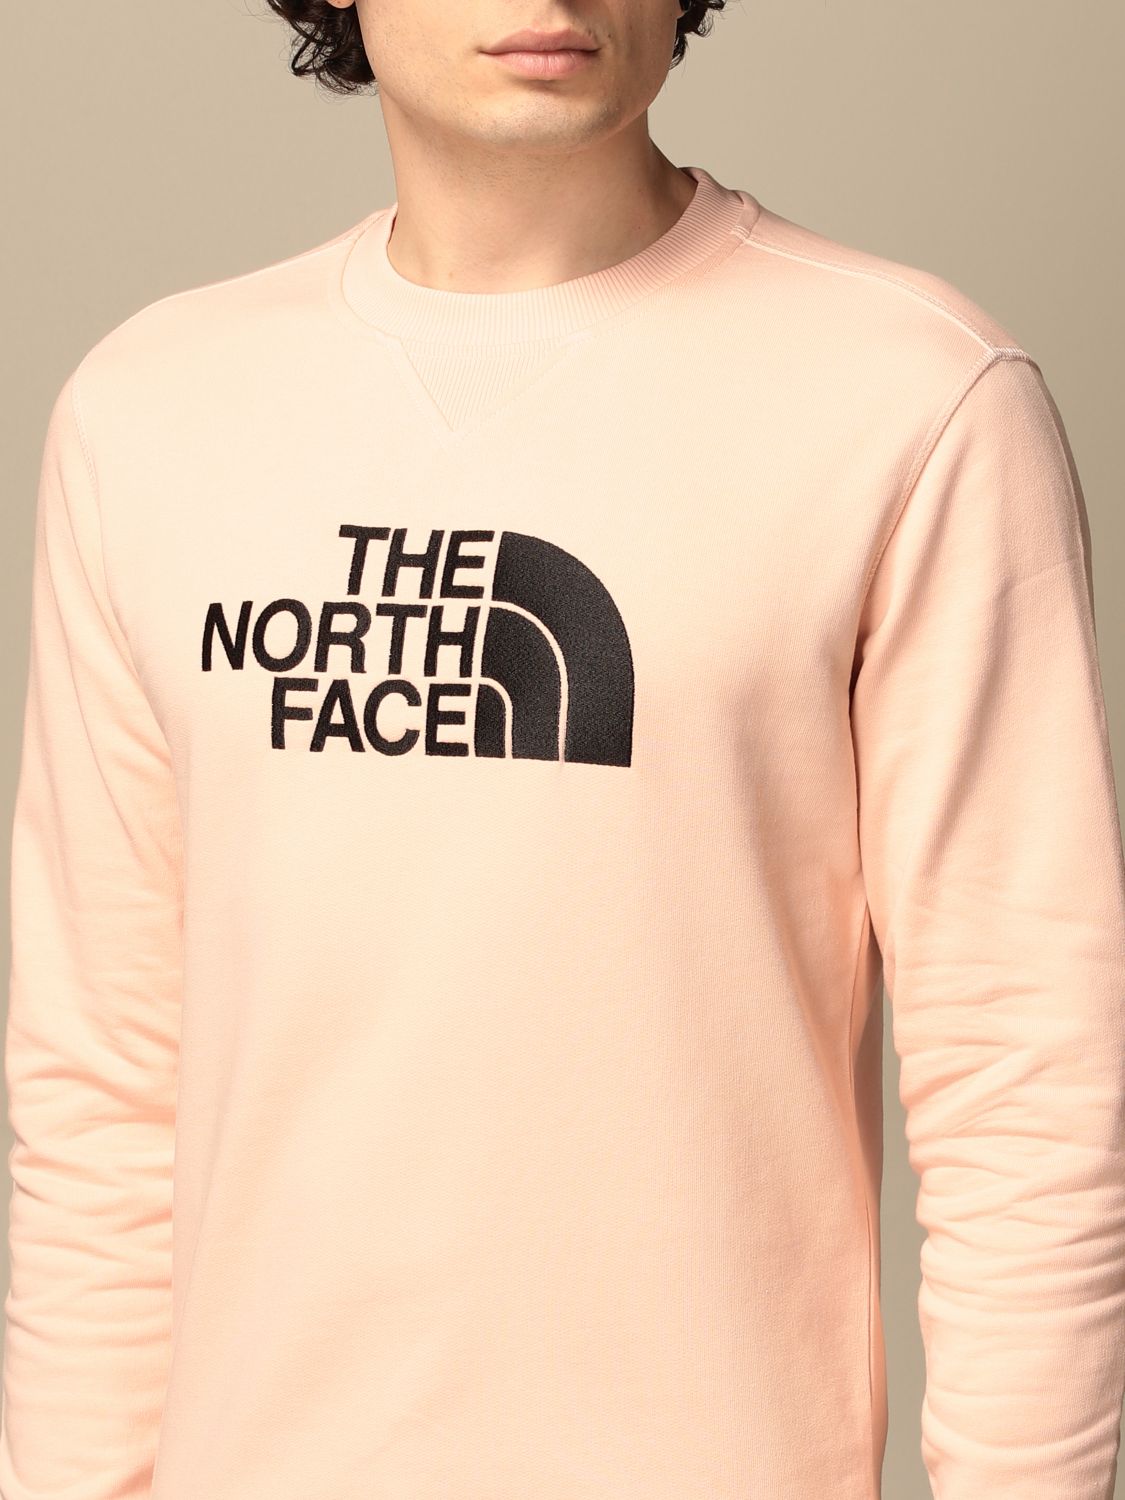 Sweatshirt The North Face: Sweatshirt homme The North Face rose 3